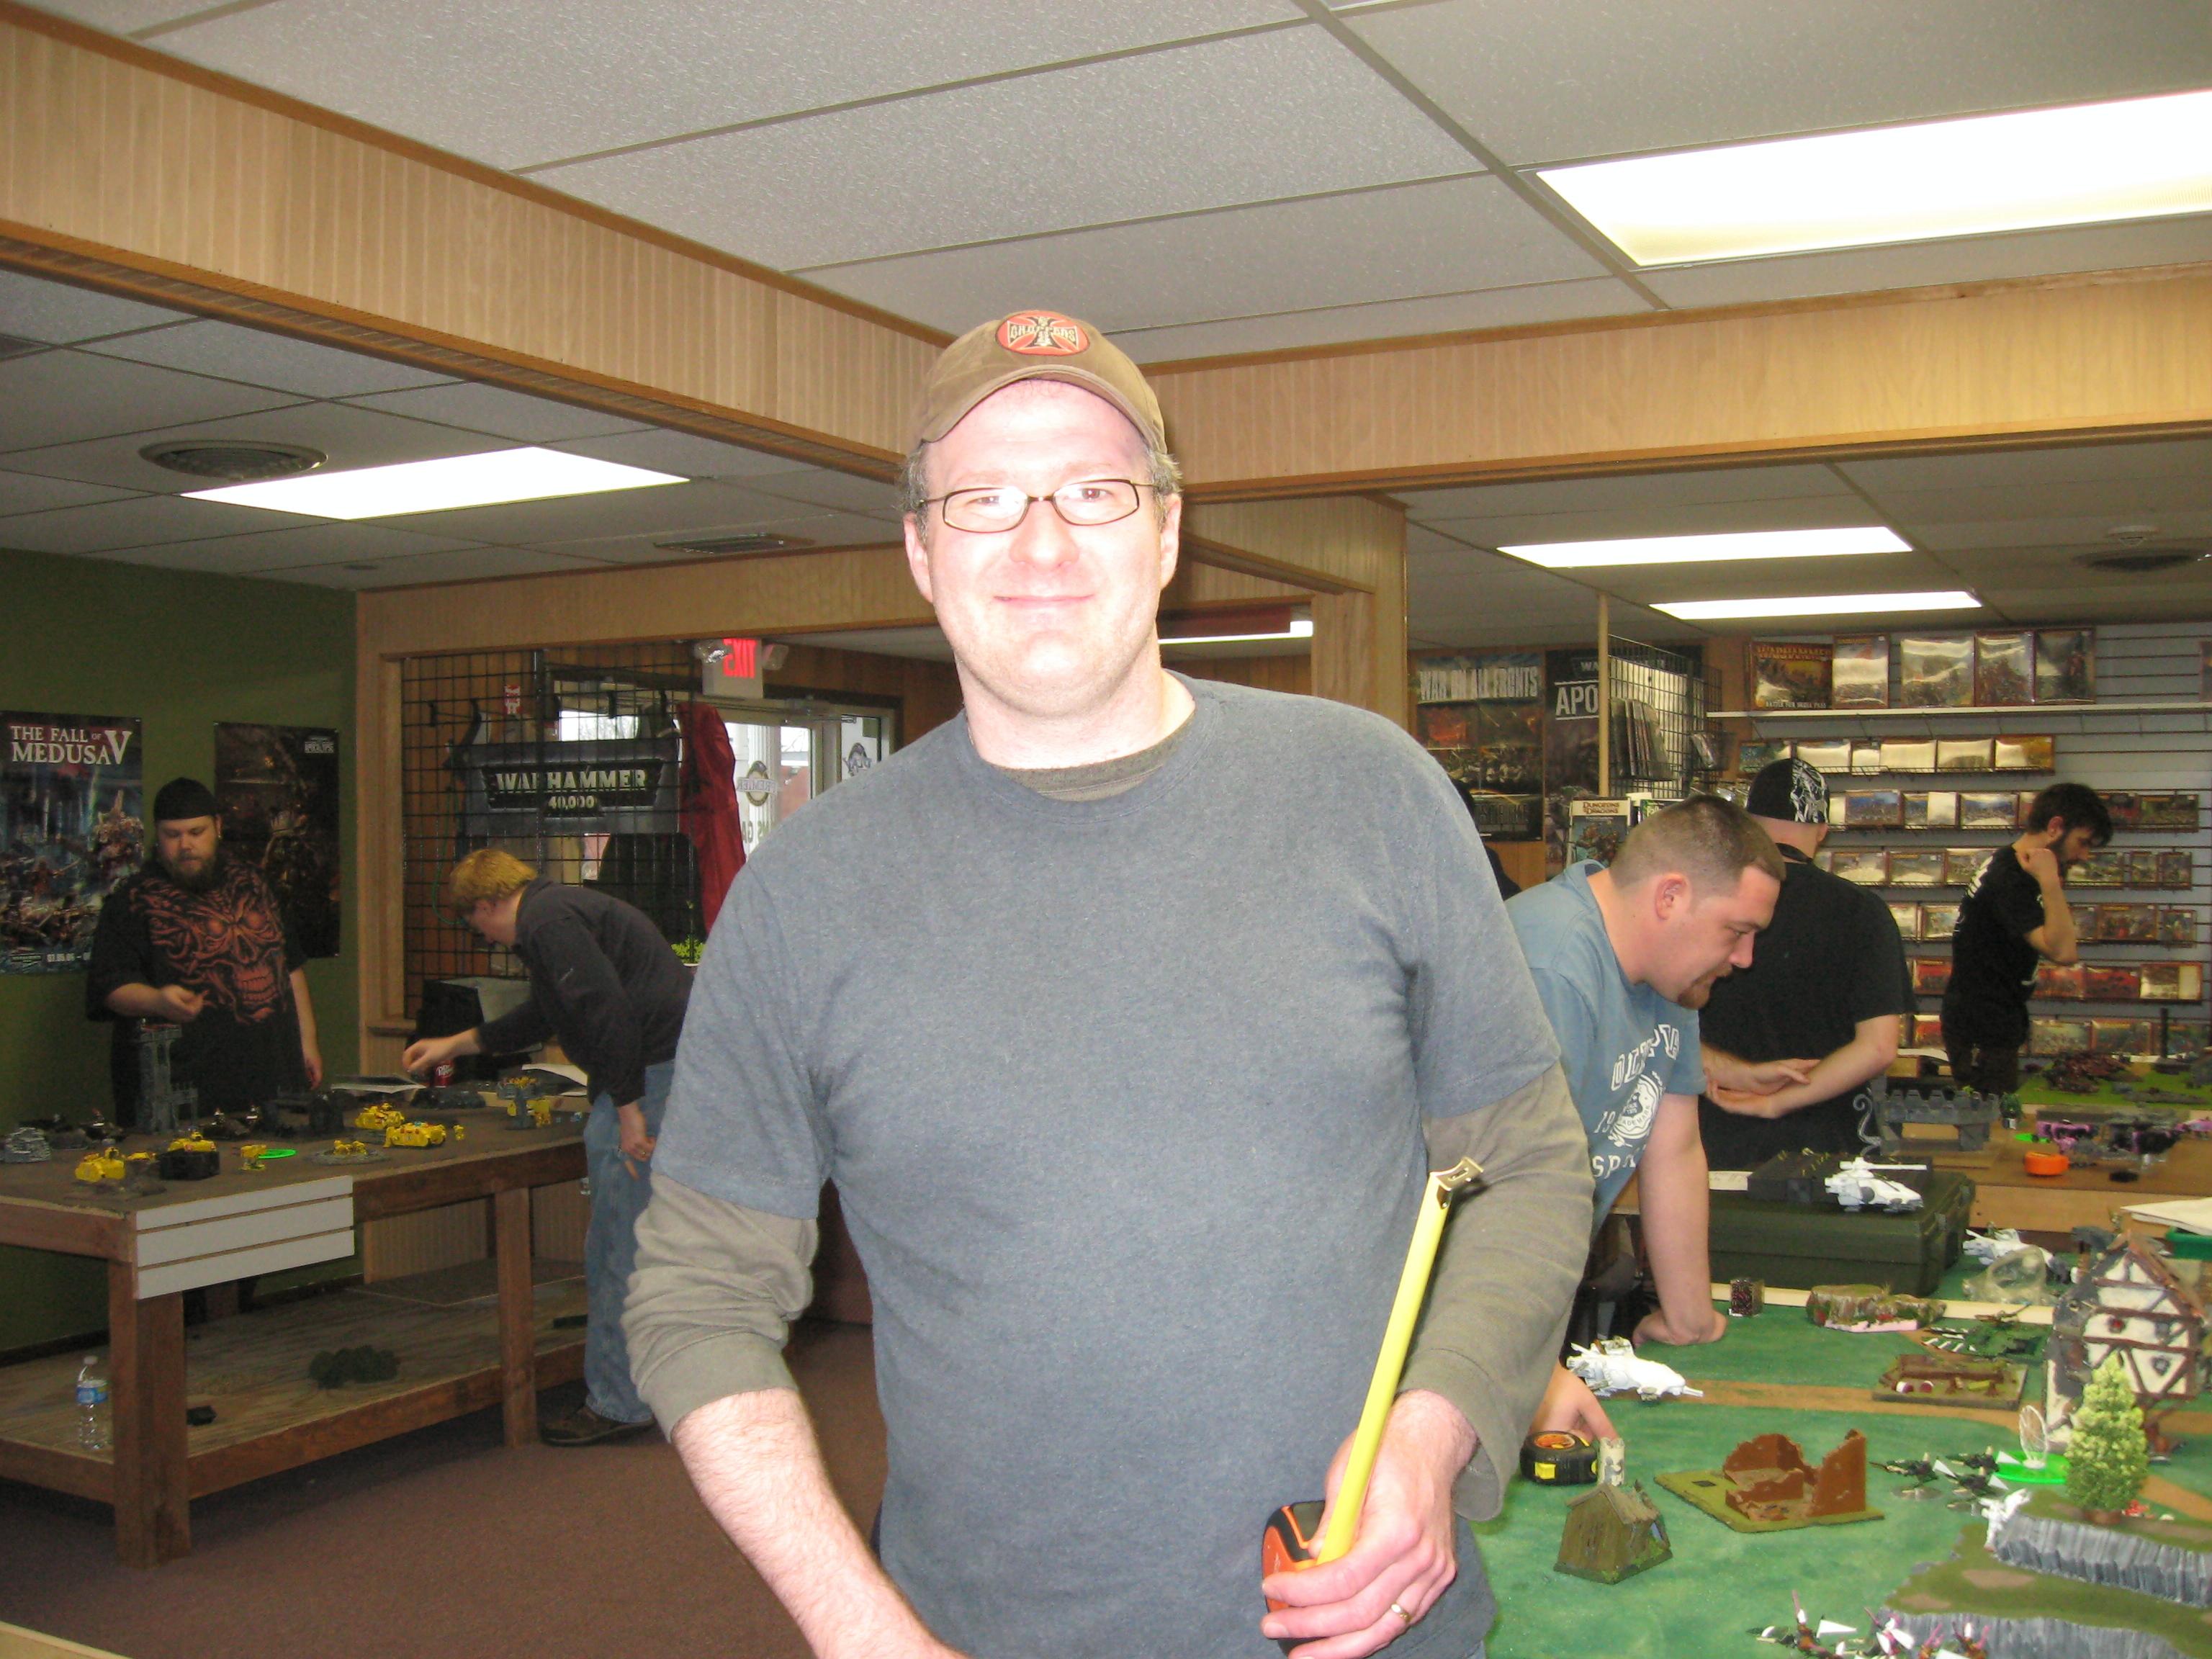 Ian, opponent for Game 2